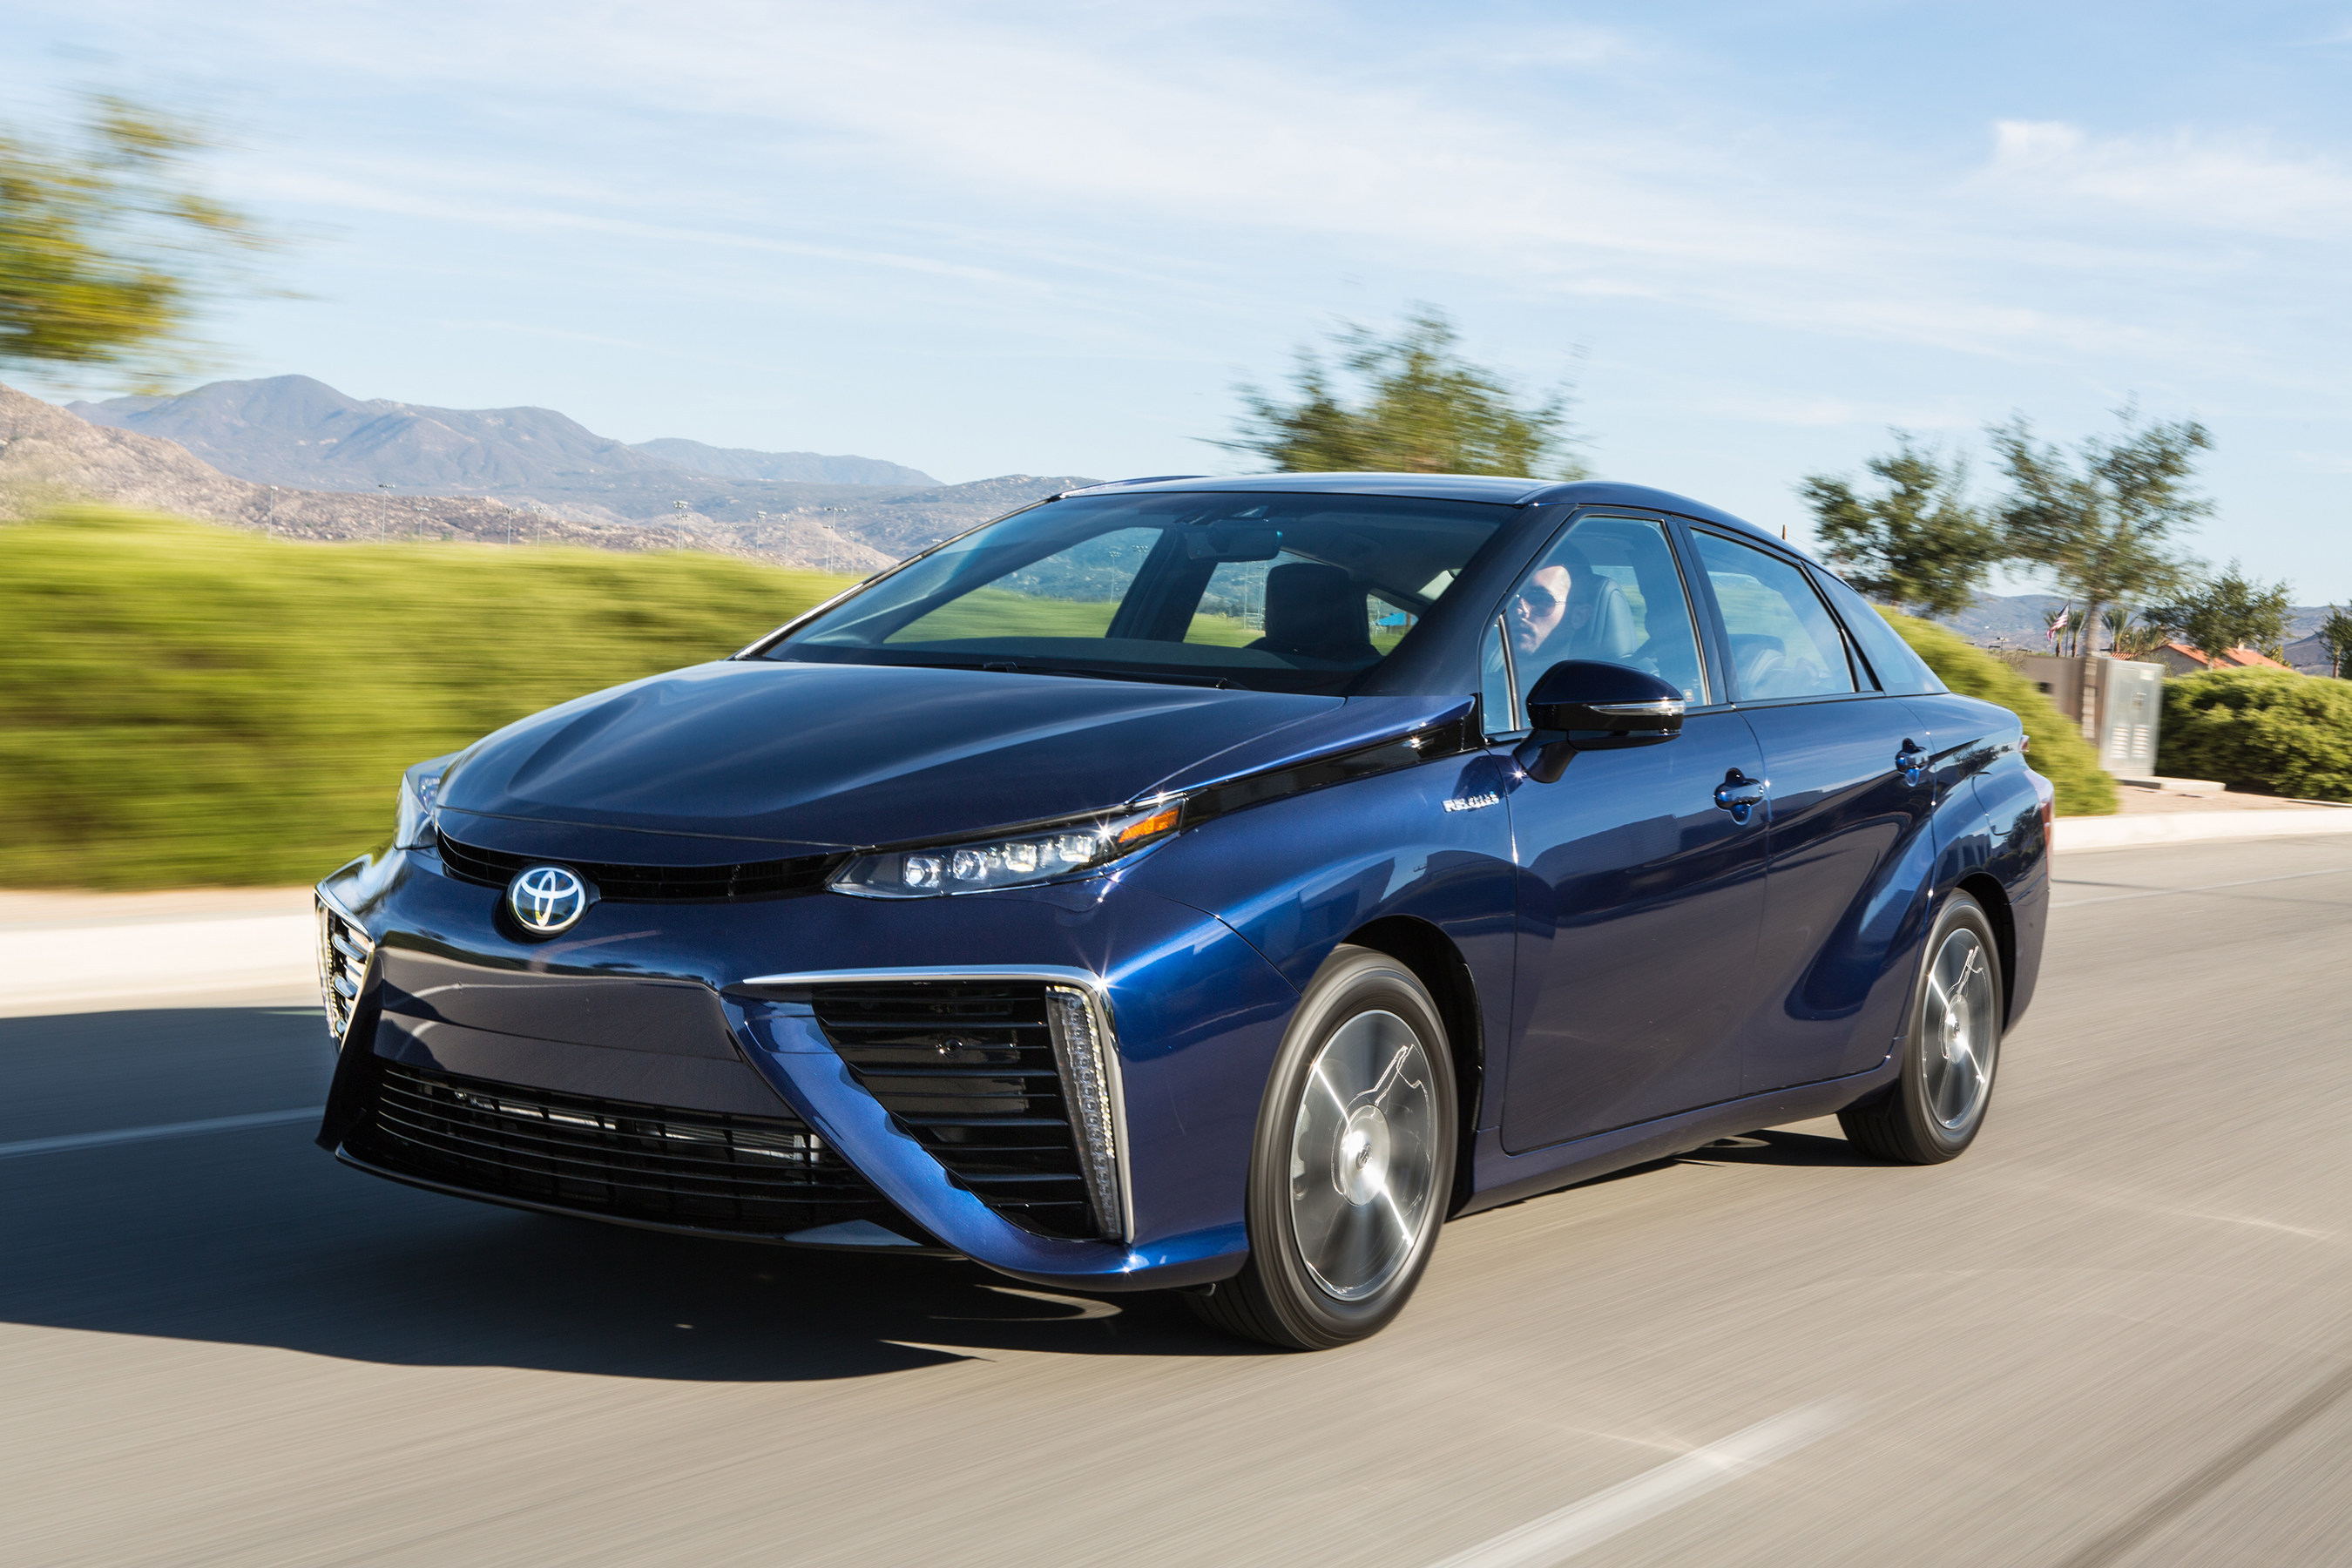 Toyota Mirai Fuel Cell Electric Vehicle for Sale in B.C. Starting in July